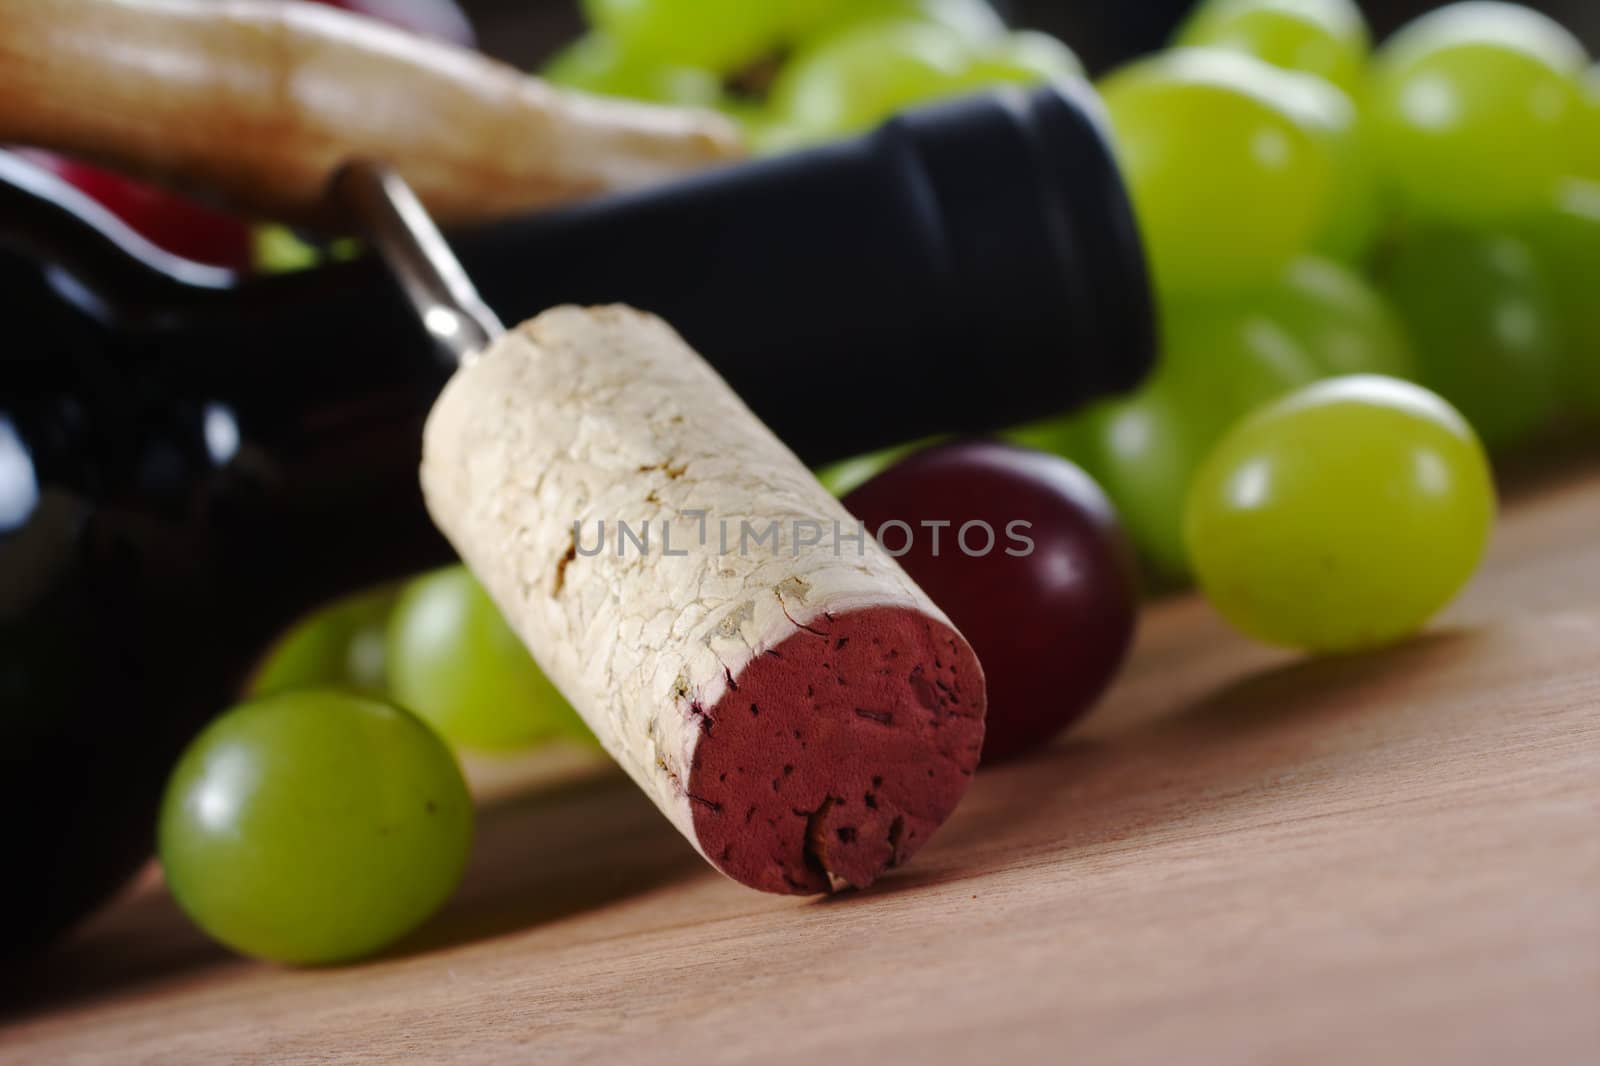 Cork on corkscrew leaning against a wine bottle surrounded by grapes (Very Shallow Depth of Field, Focus on the upper edge of the cork)